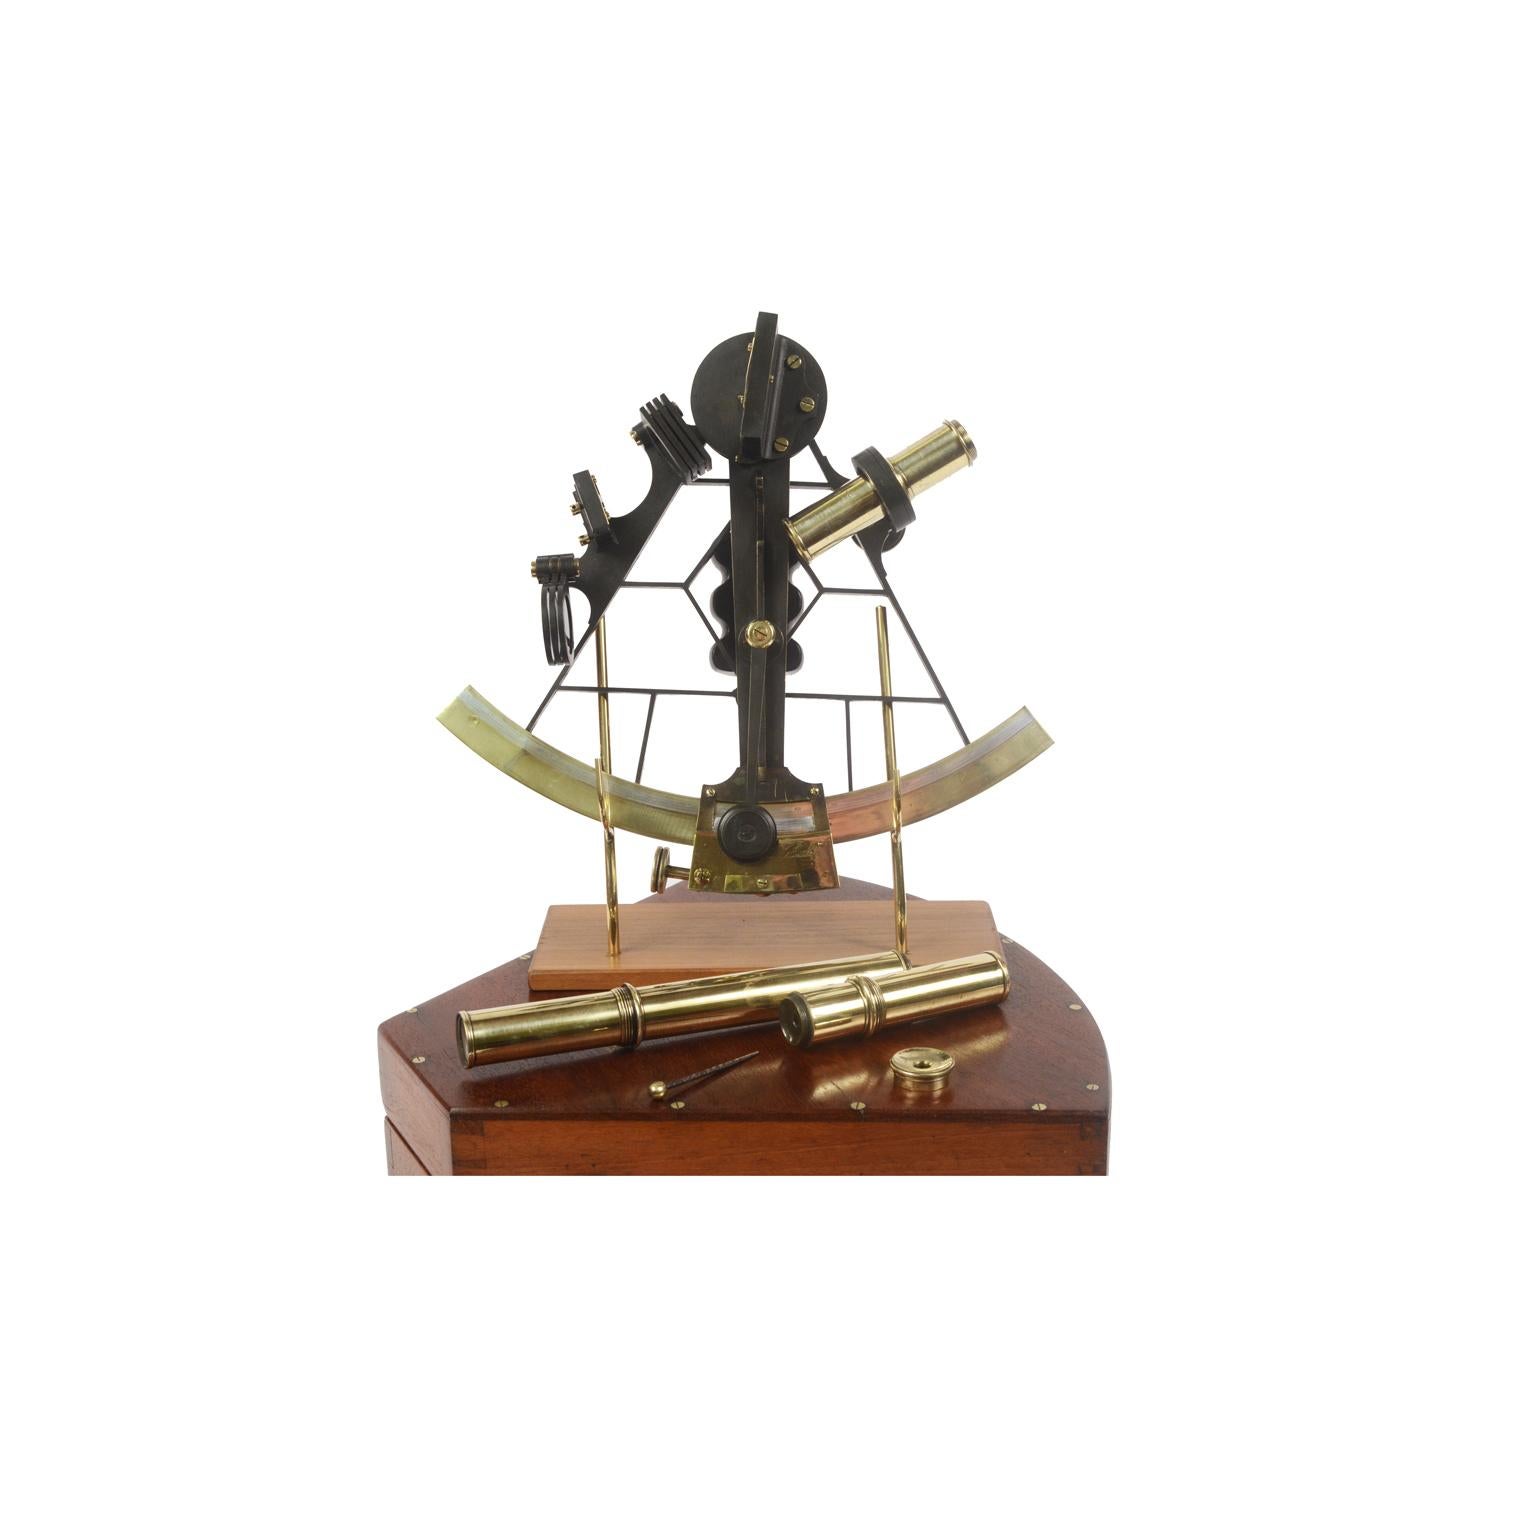 Brass sextant signed WC COX Devonport made in the mid-19th century, instrument complete with three telescopes, one of which is long, a filter, an adjustment key and placed in its original mahogany wood box shaped like the instrument with hinges and